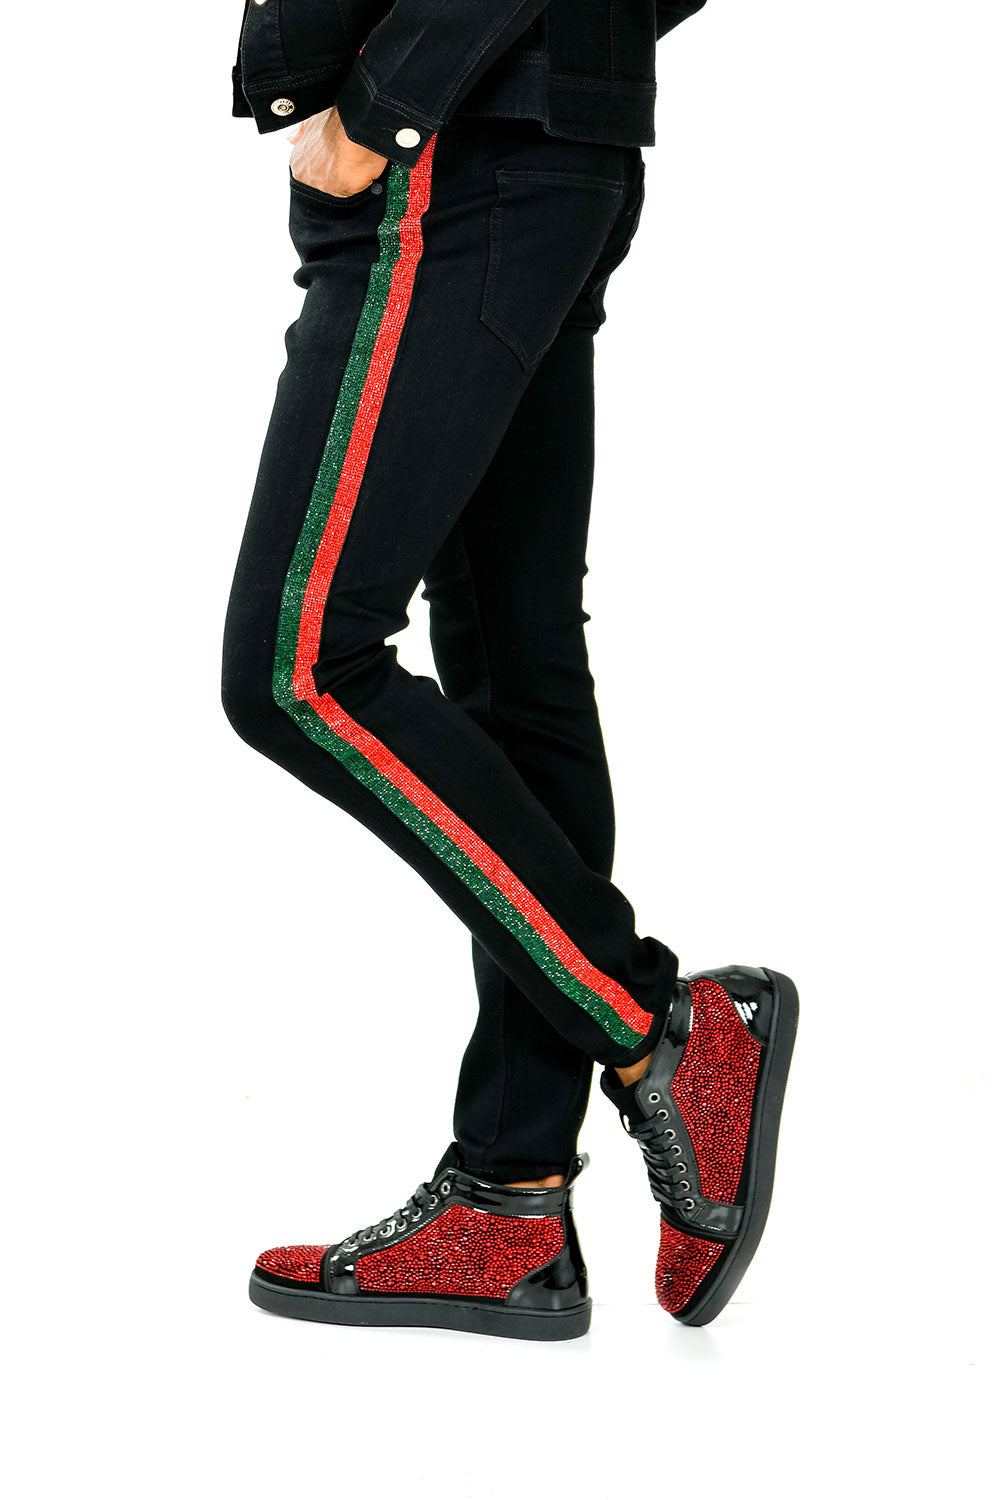 BARABAS Men's Red and Green Rhinestone Jeans SN8857